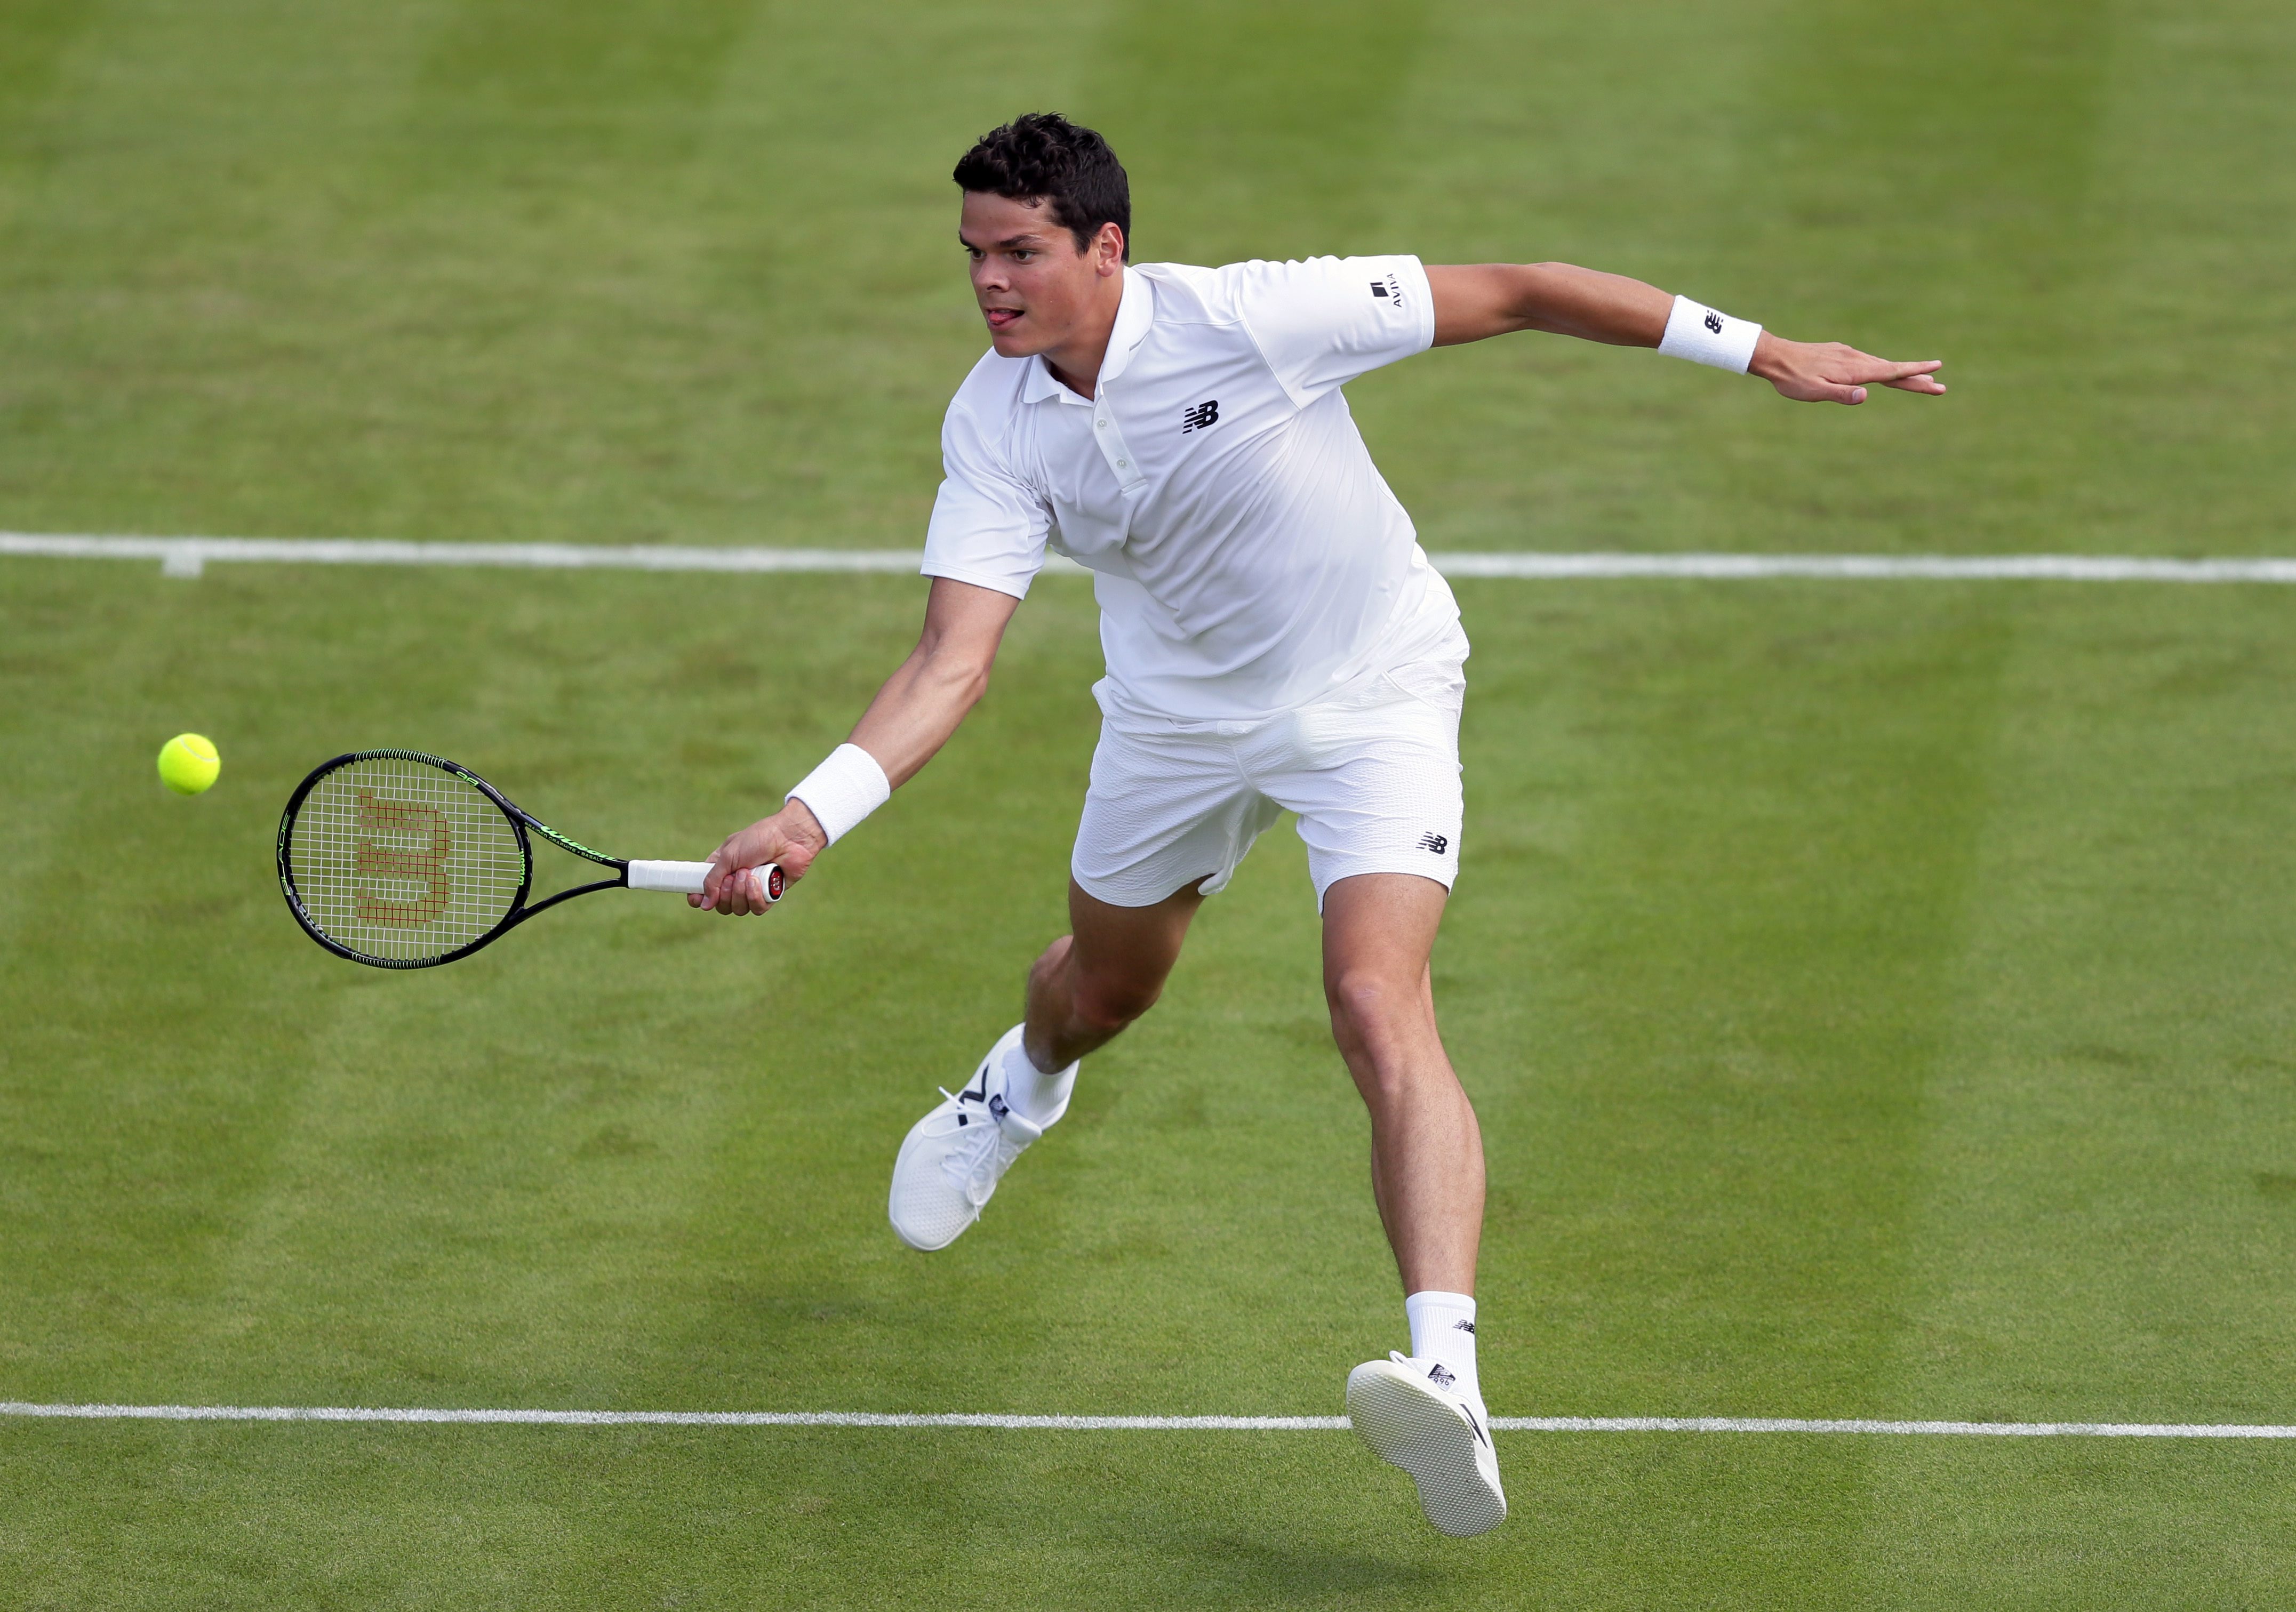 Milos Raonic of Canada plays a return to Pablo Carreno Busta of Spain during their men's singles match on day one of the Wimbledon Tennis Championships in London, Monday, June 27, 2016. (AP Photo/Tim Ireland)